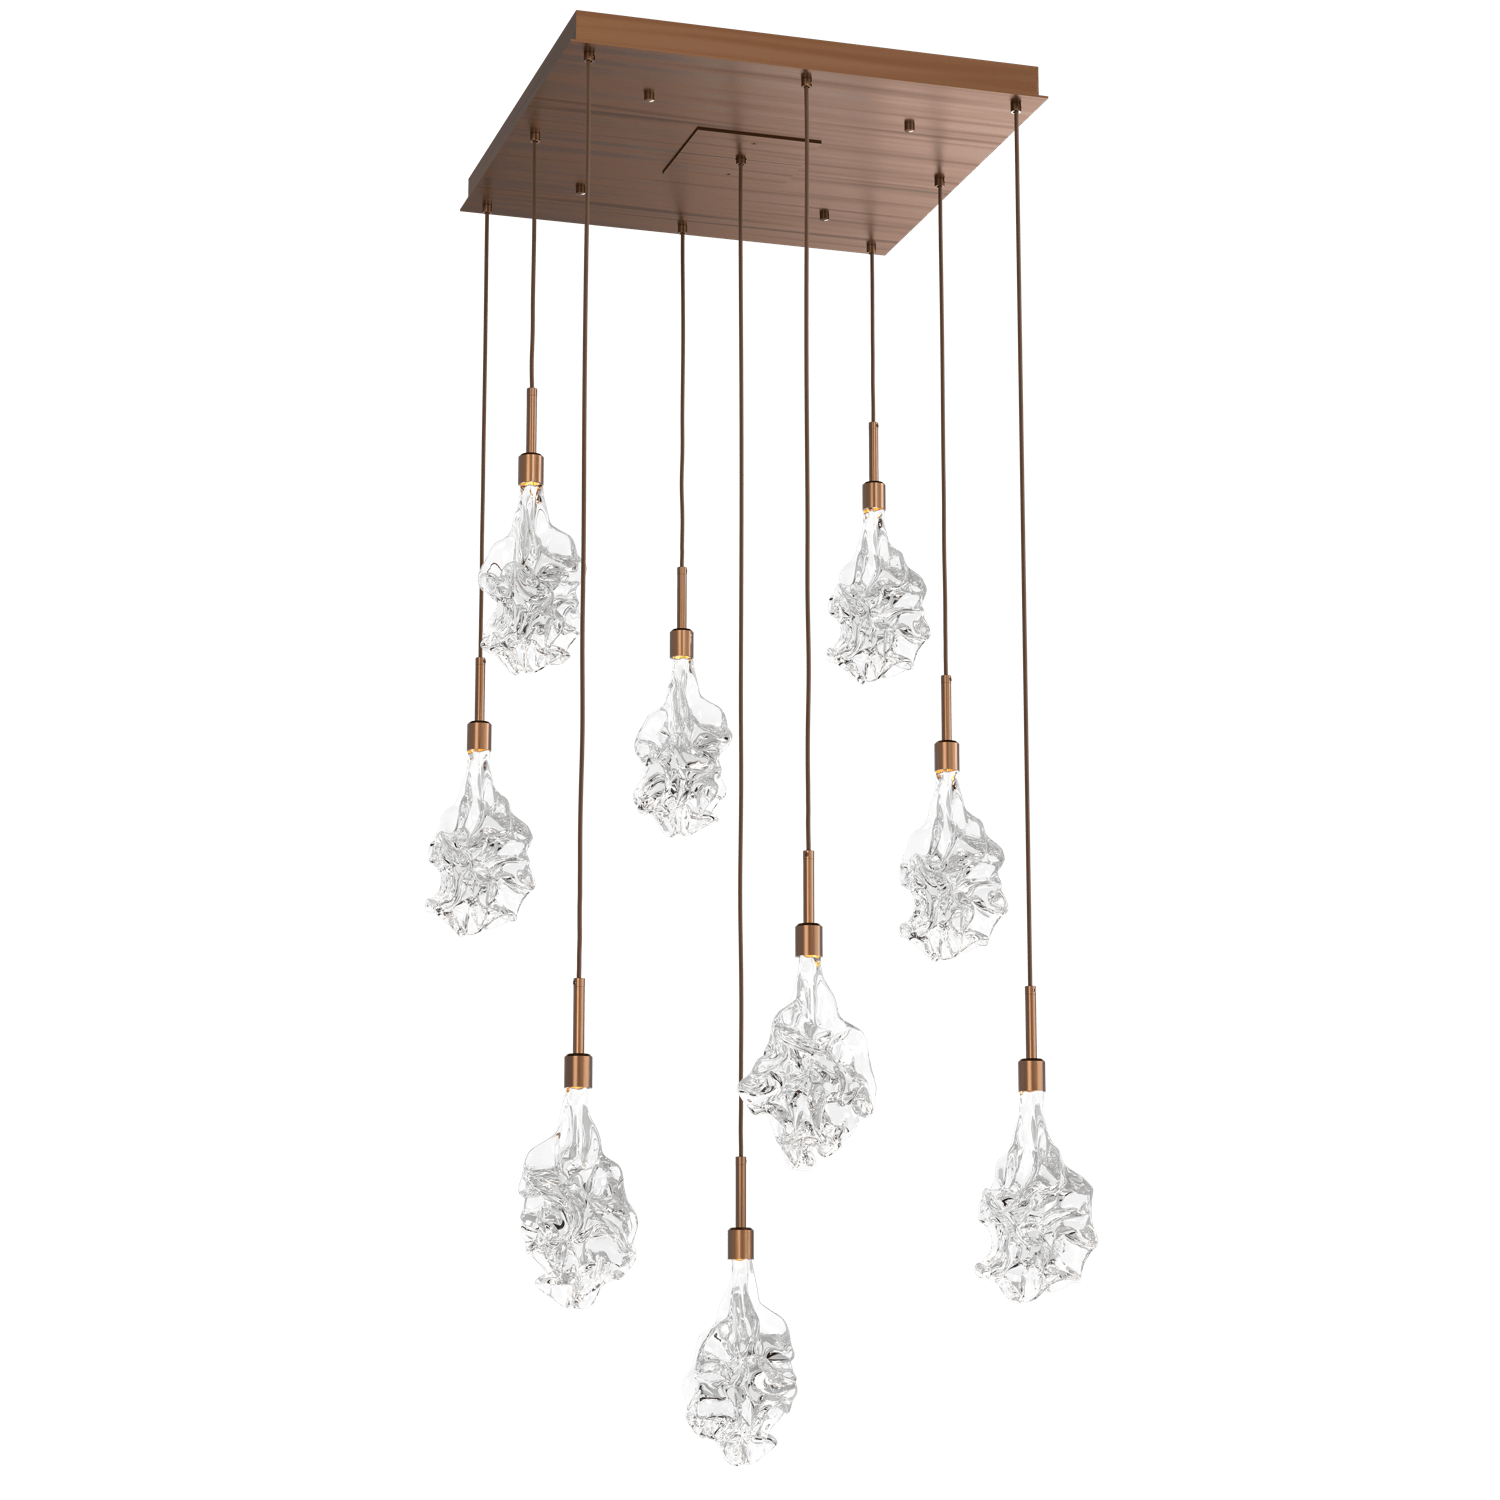 CHB0059-09-RB-Hammerton-Studio-Blossom-9-light-square-pendant-chandelier-with-oil-rubbed-bronze-finish-and-clear-handblown-crystal-glass-shades-and-LED-lamping